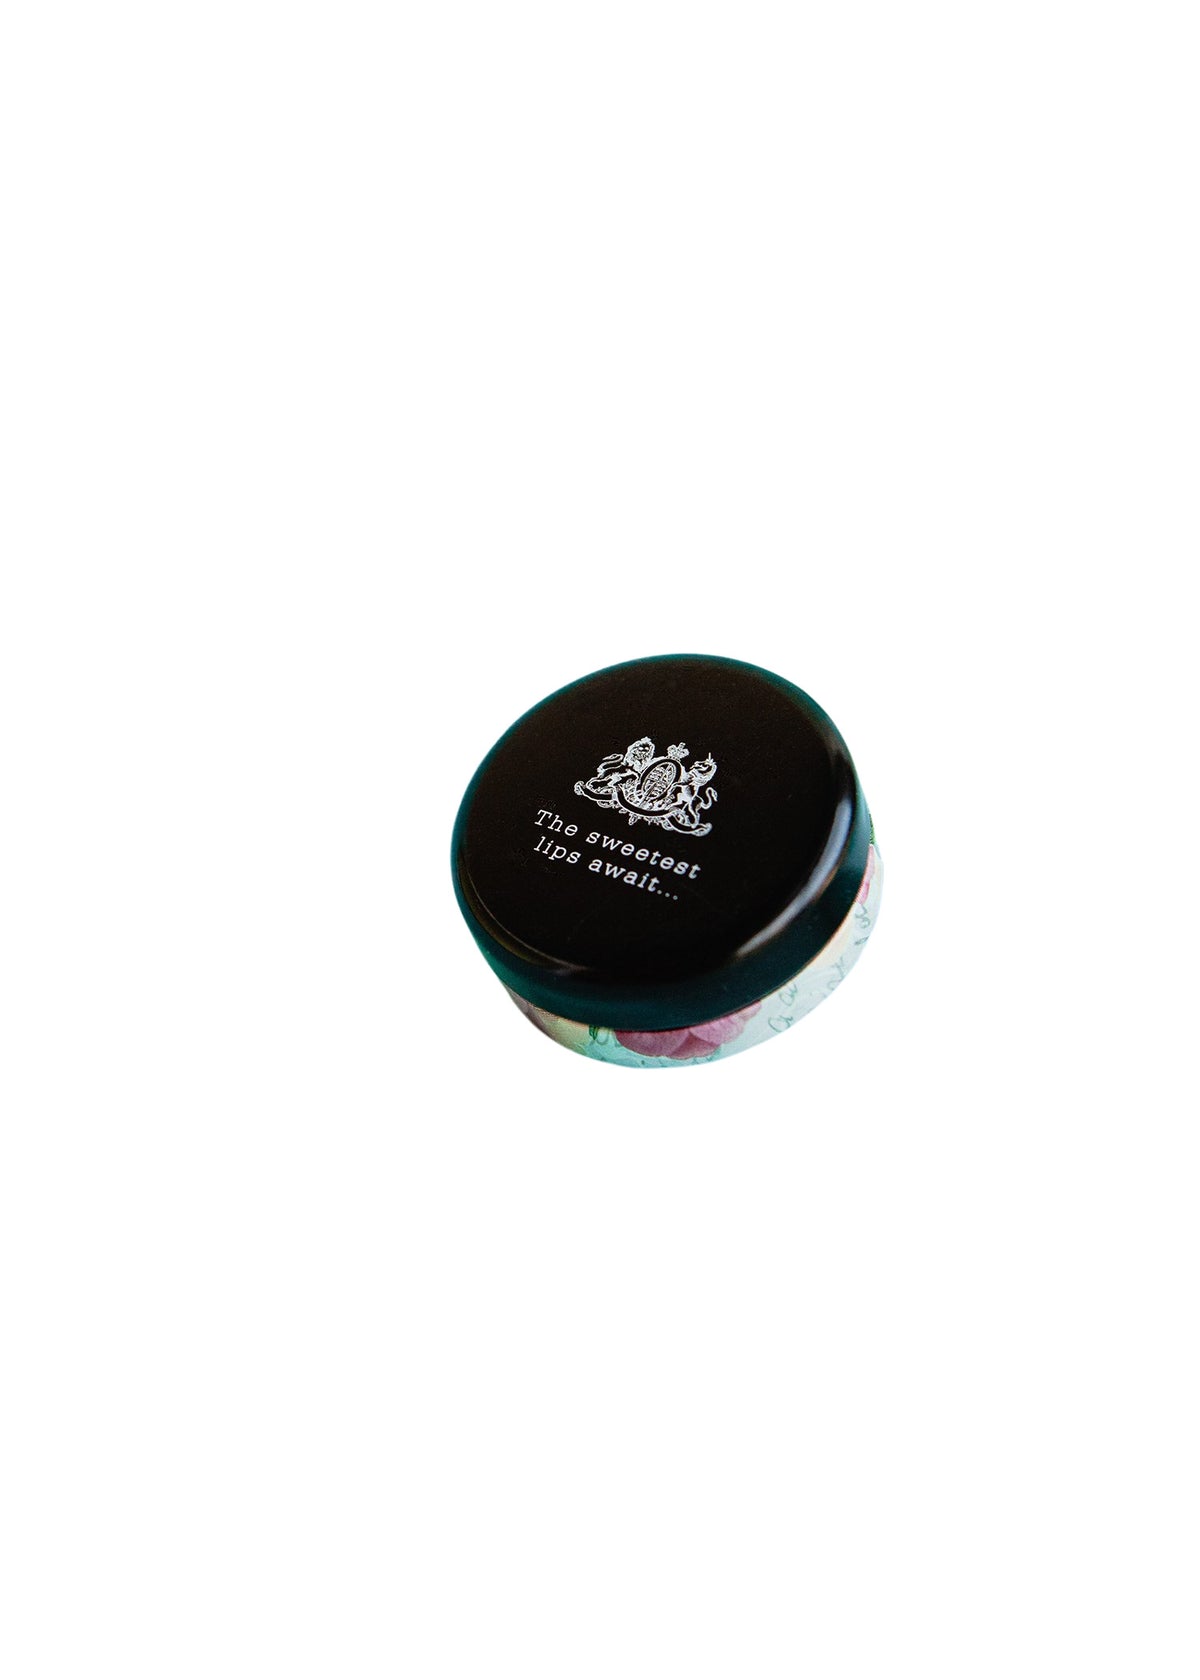 A small, circular tin lip balm container, predominantly black, labeled "TokyoMilk Dead Sexy Lip Balm." The container rests on a plain white background. Brand Name: Margot Elena